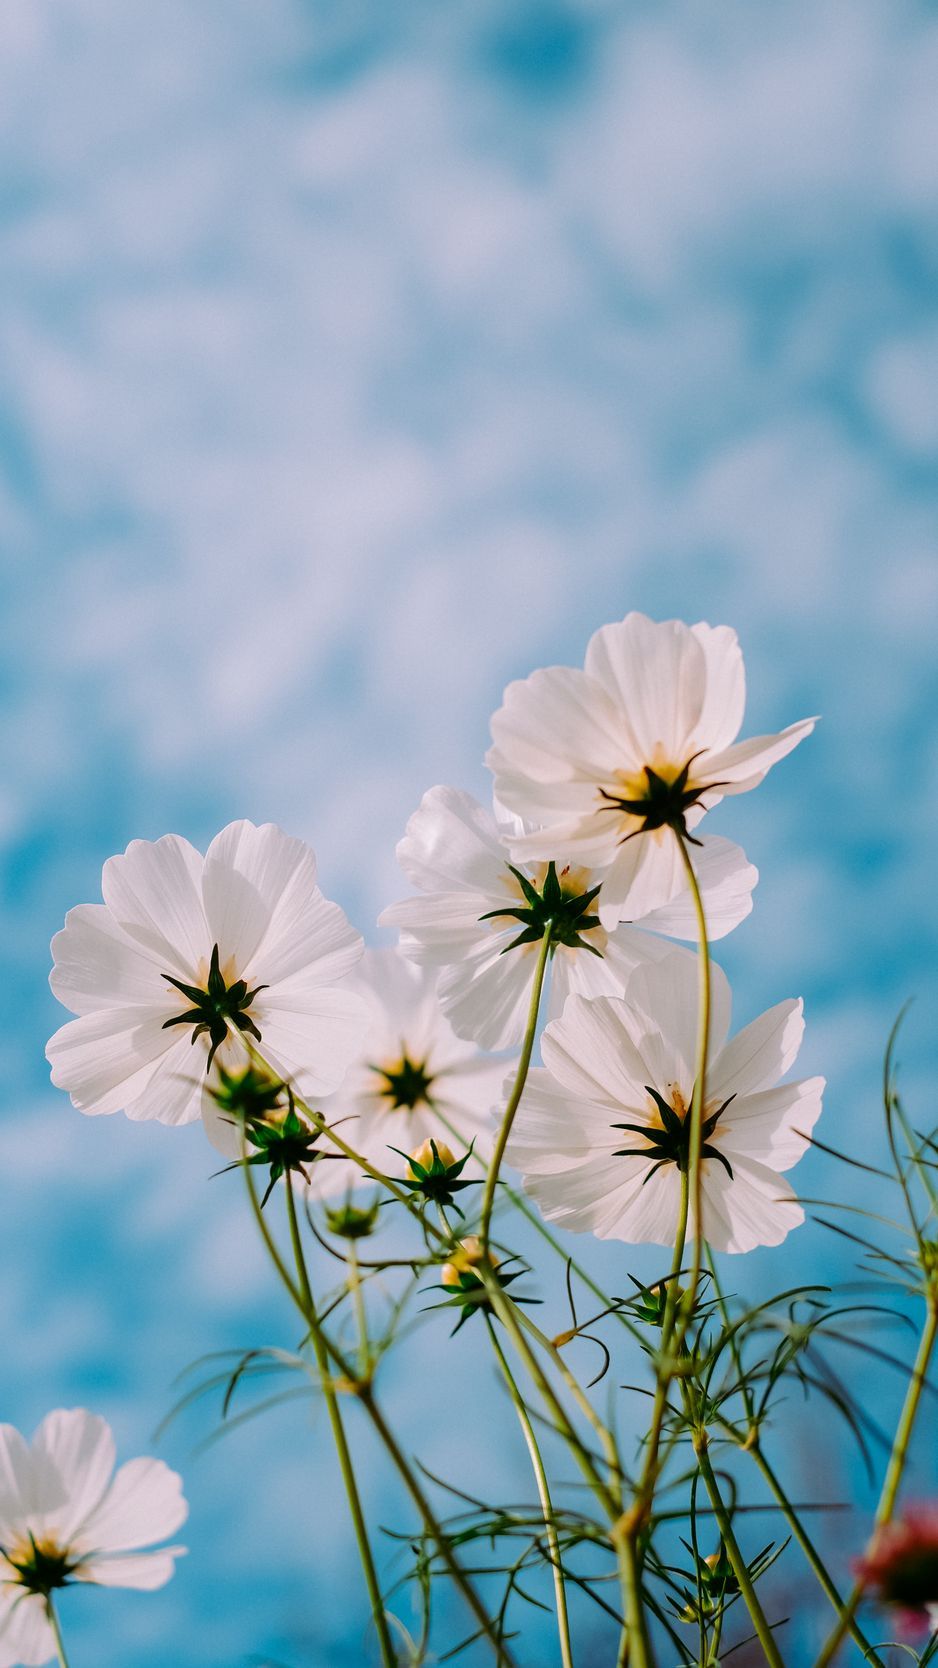 Download wallpaper 938x1668 cosmos, flowers, white, petals, sky